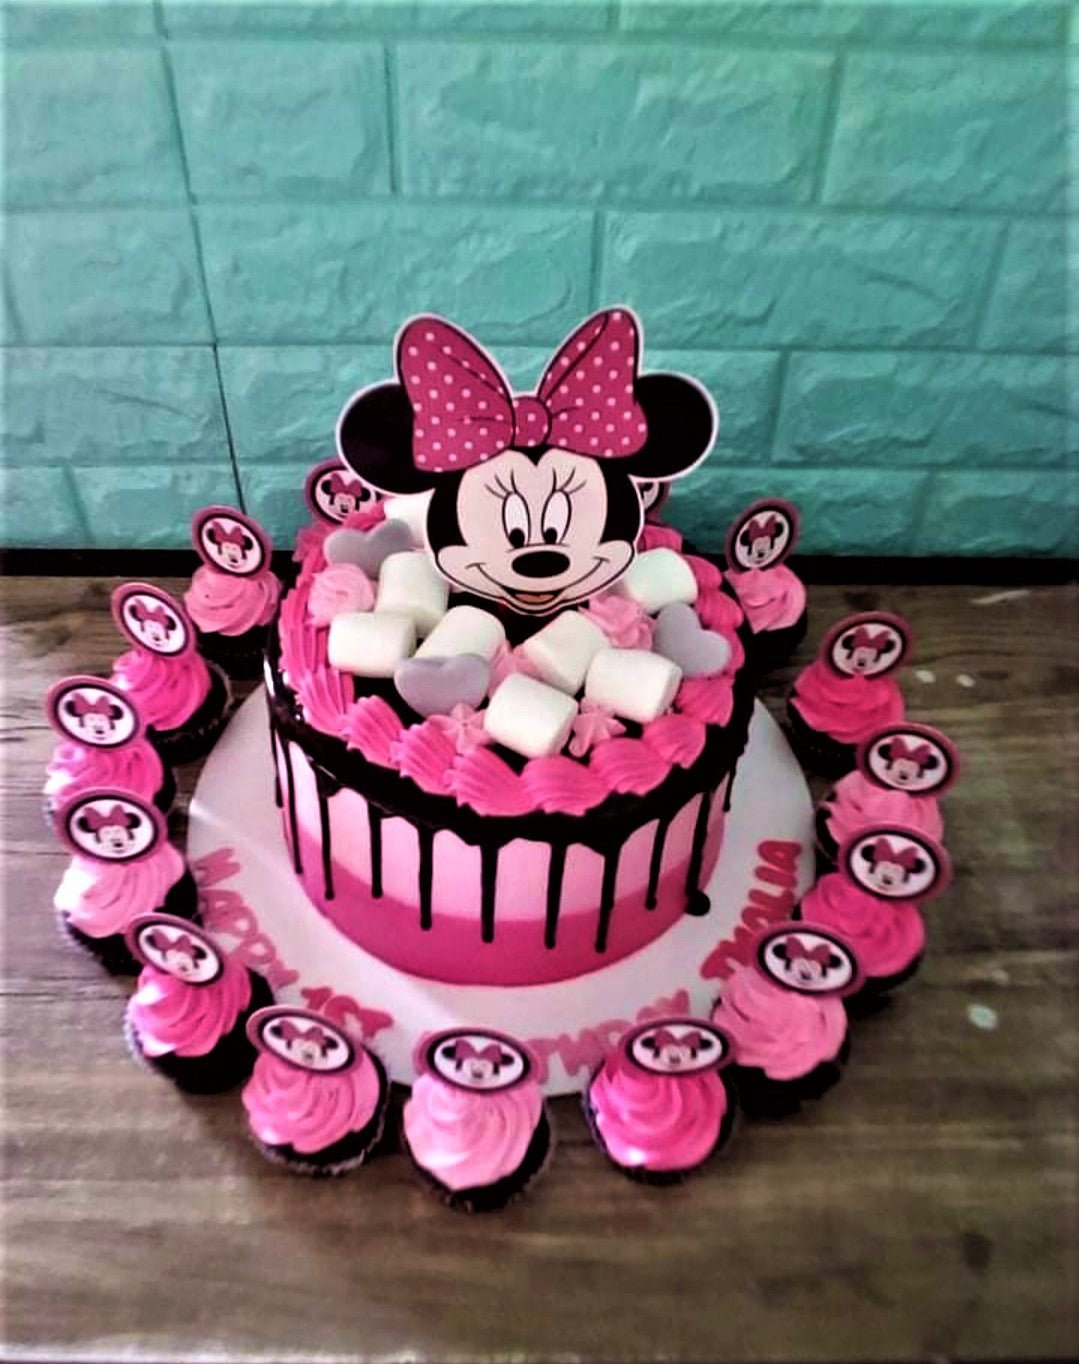 Minnie Mouse fondant cake, Food & Drinks, Homemade Bakes on Carousell